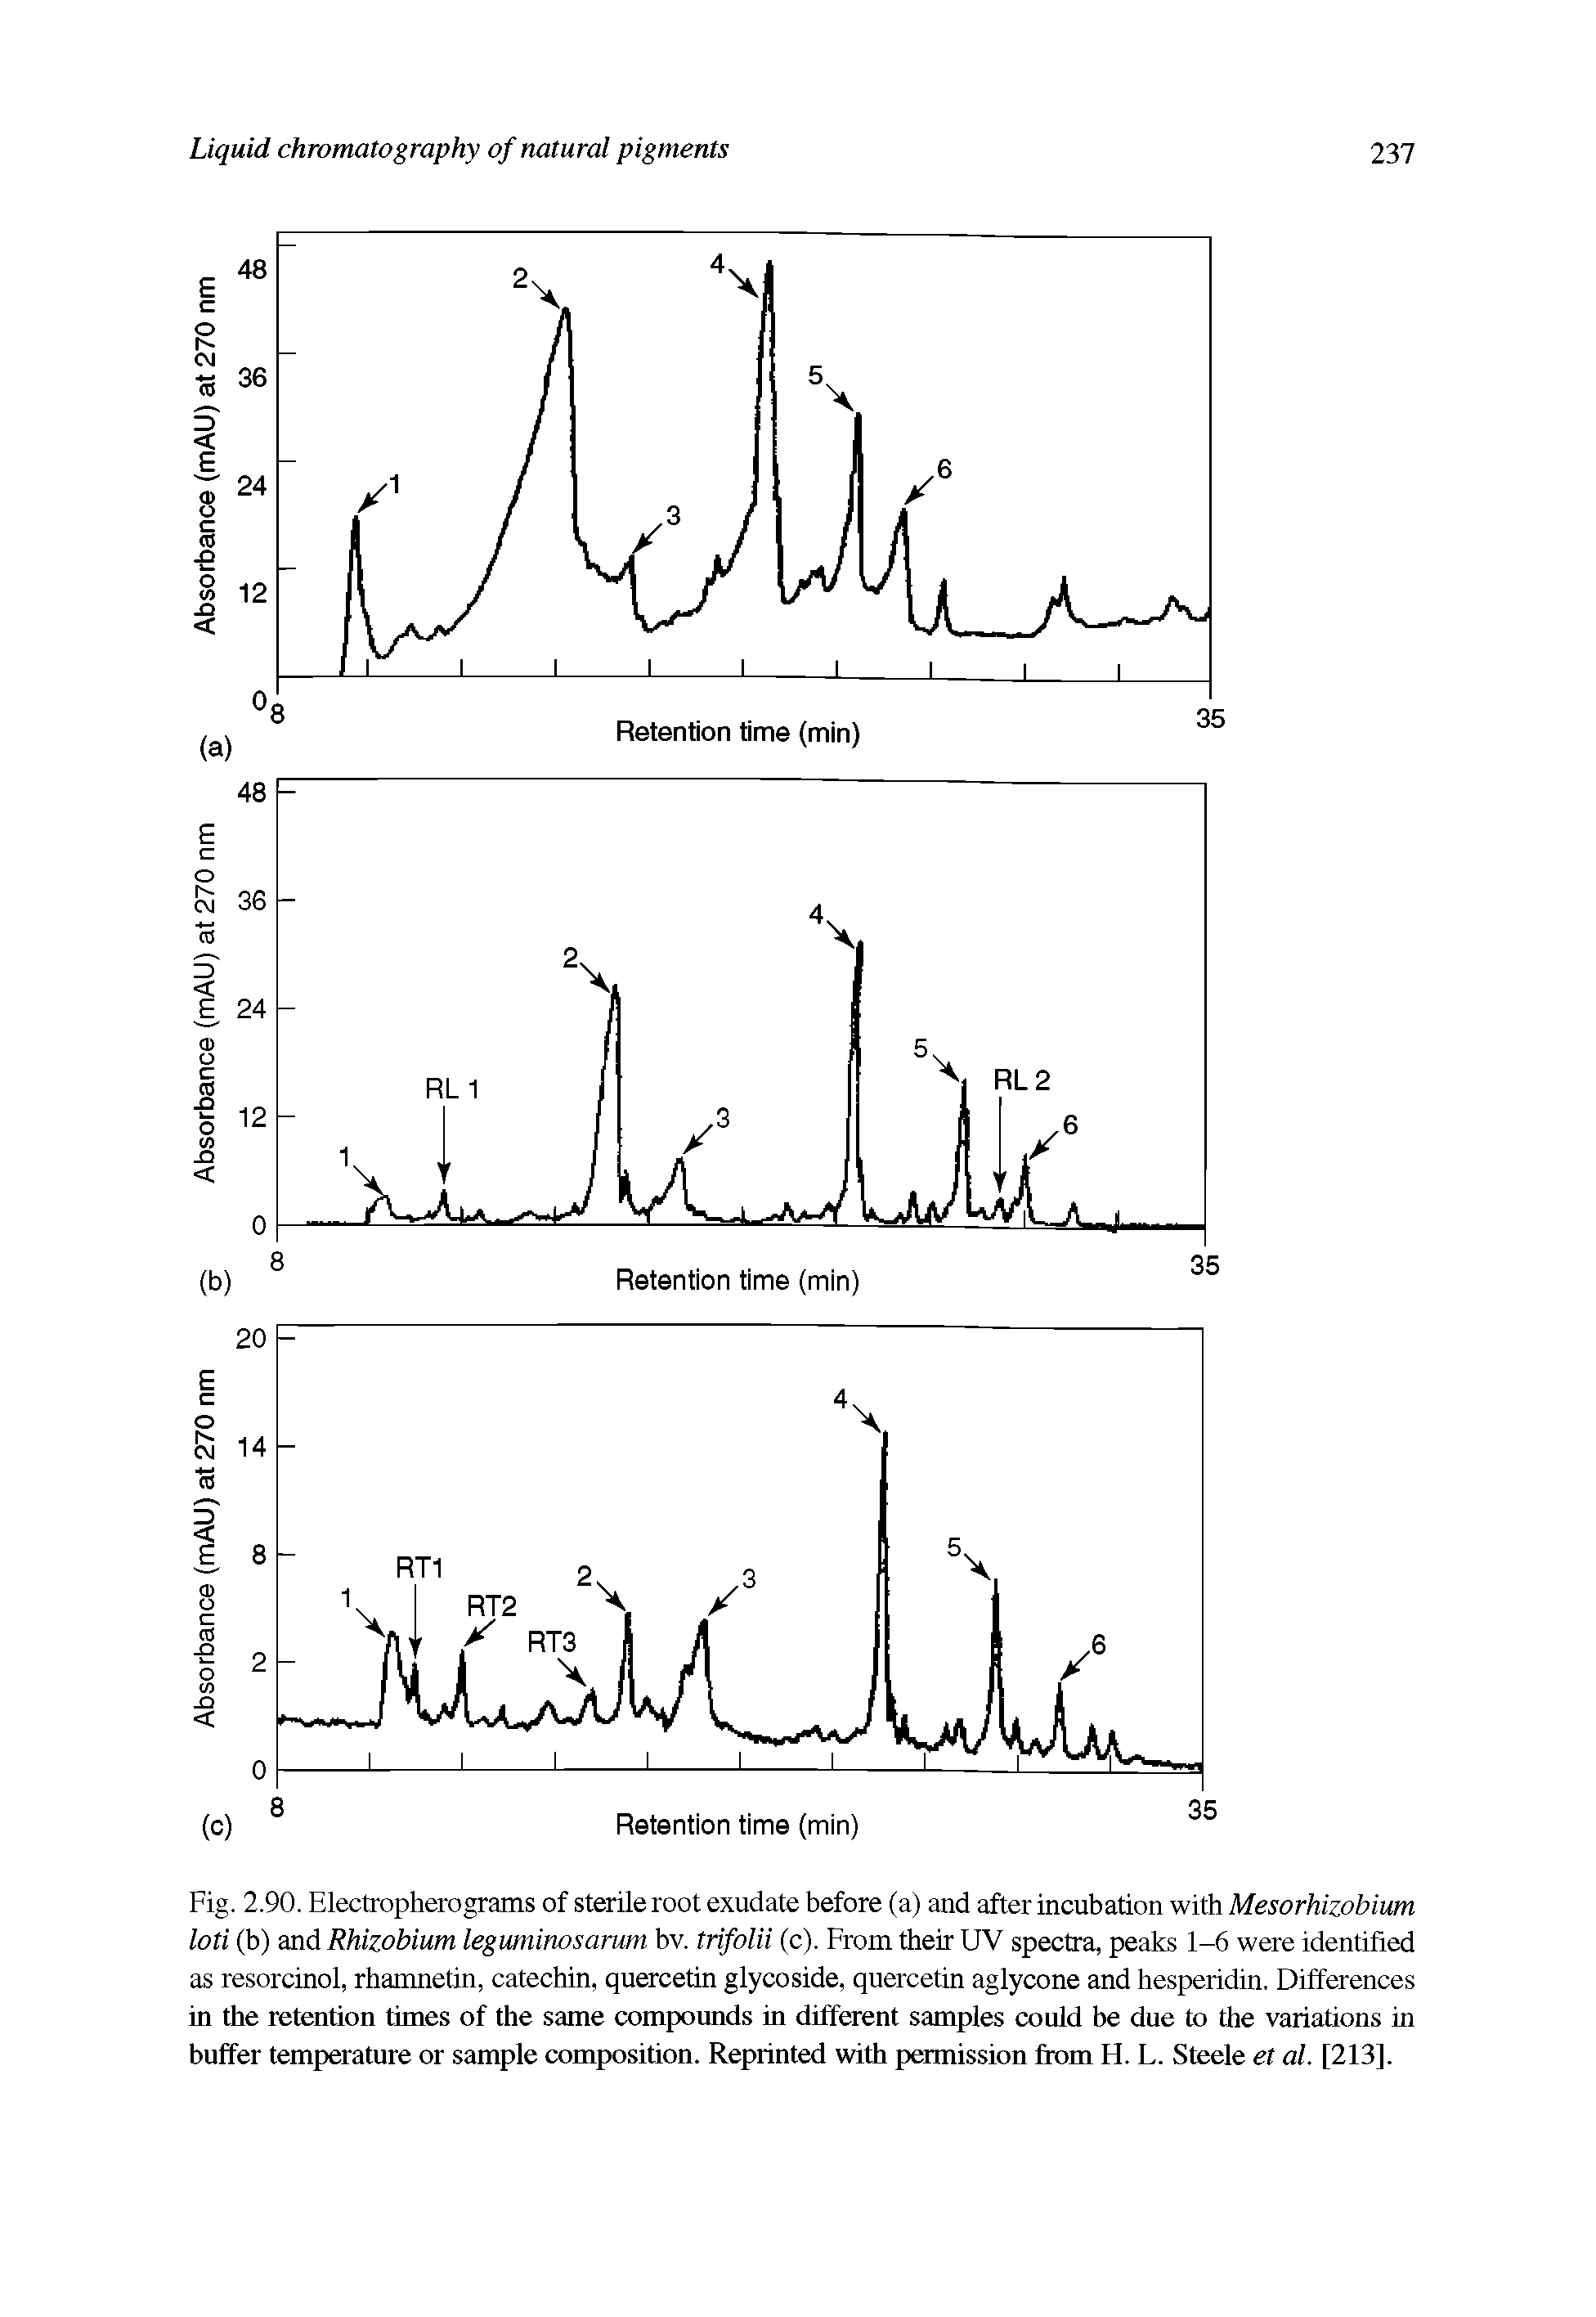 Fig. 2.90. Electropherograms of sterile root exudate before (a) and after incubation with Mesorhizobium loti (b) and Rhizobium leguminosarum bv. trifolii (c). From their UV spectra, peaks 1-6 were identified as resorcinol, rhamnetin, catechin, quercetin glycoside, quercetin aglycone and hesperidin. Differences in the retention times of the same compounds in different samples could be due to the variations in buffer temperature or sample composition. Reprinted with permission from H. L. Steele et al. [213].